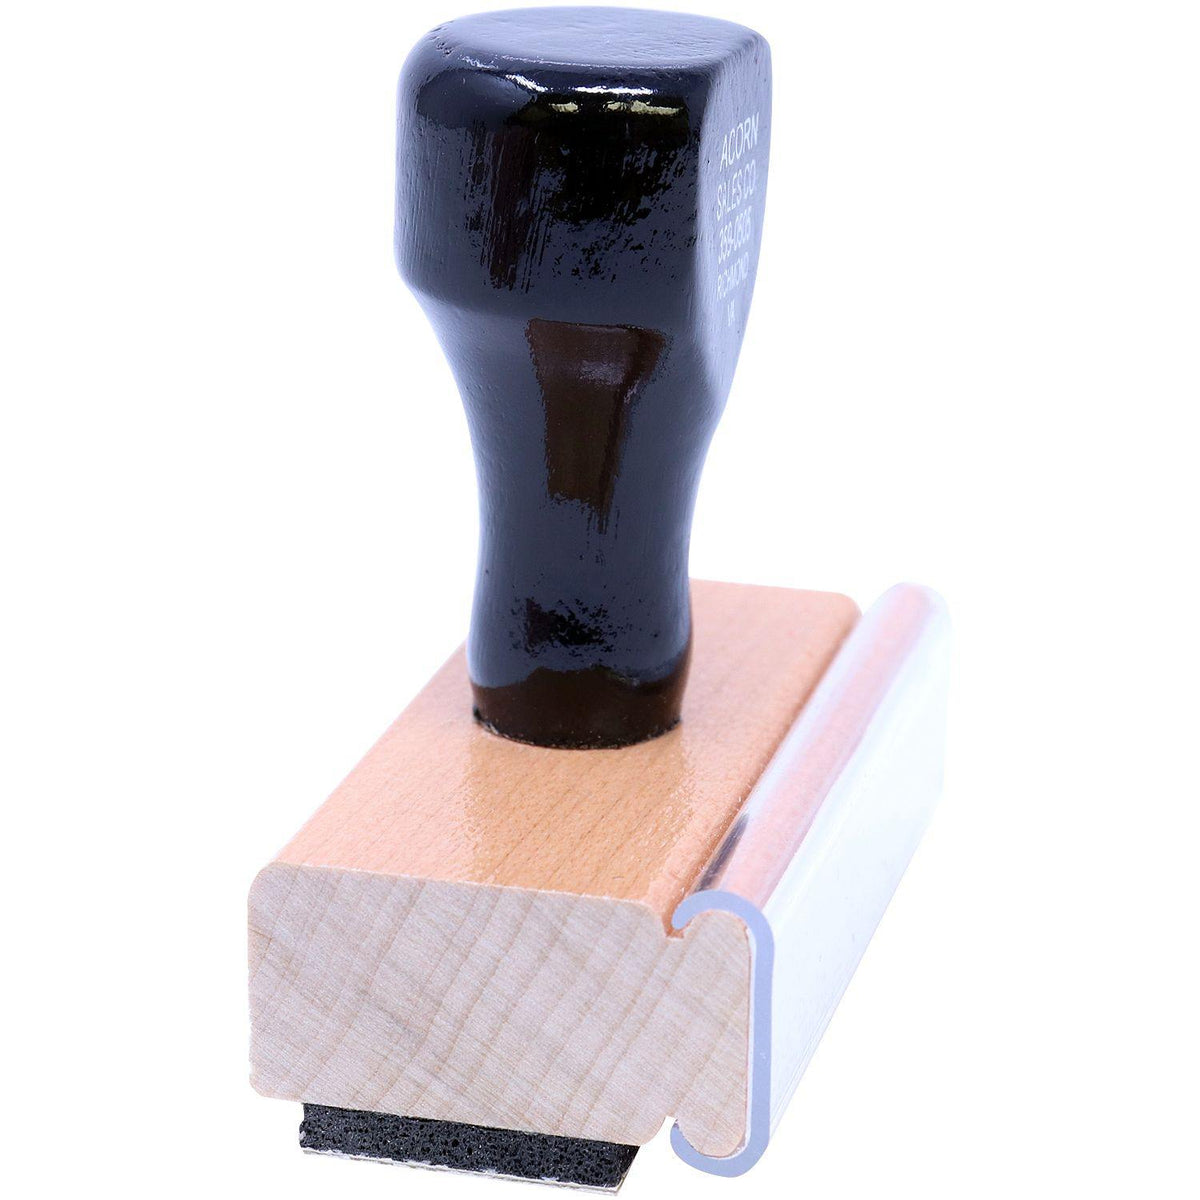 Side View of Fyi Rubber Stamp at an Angle